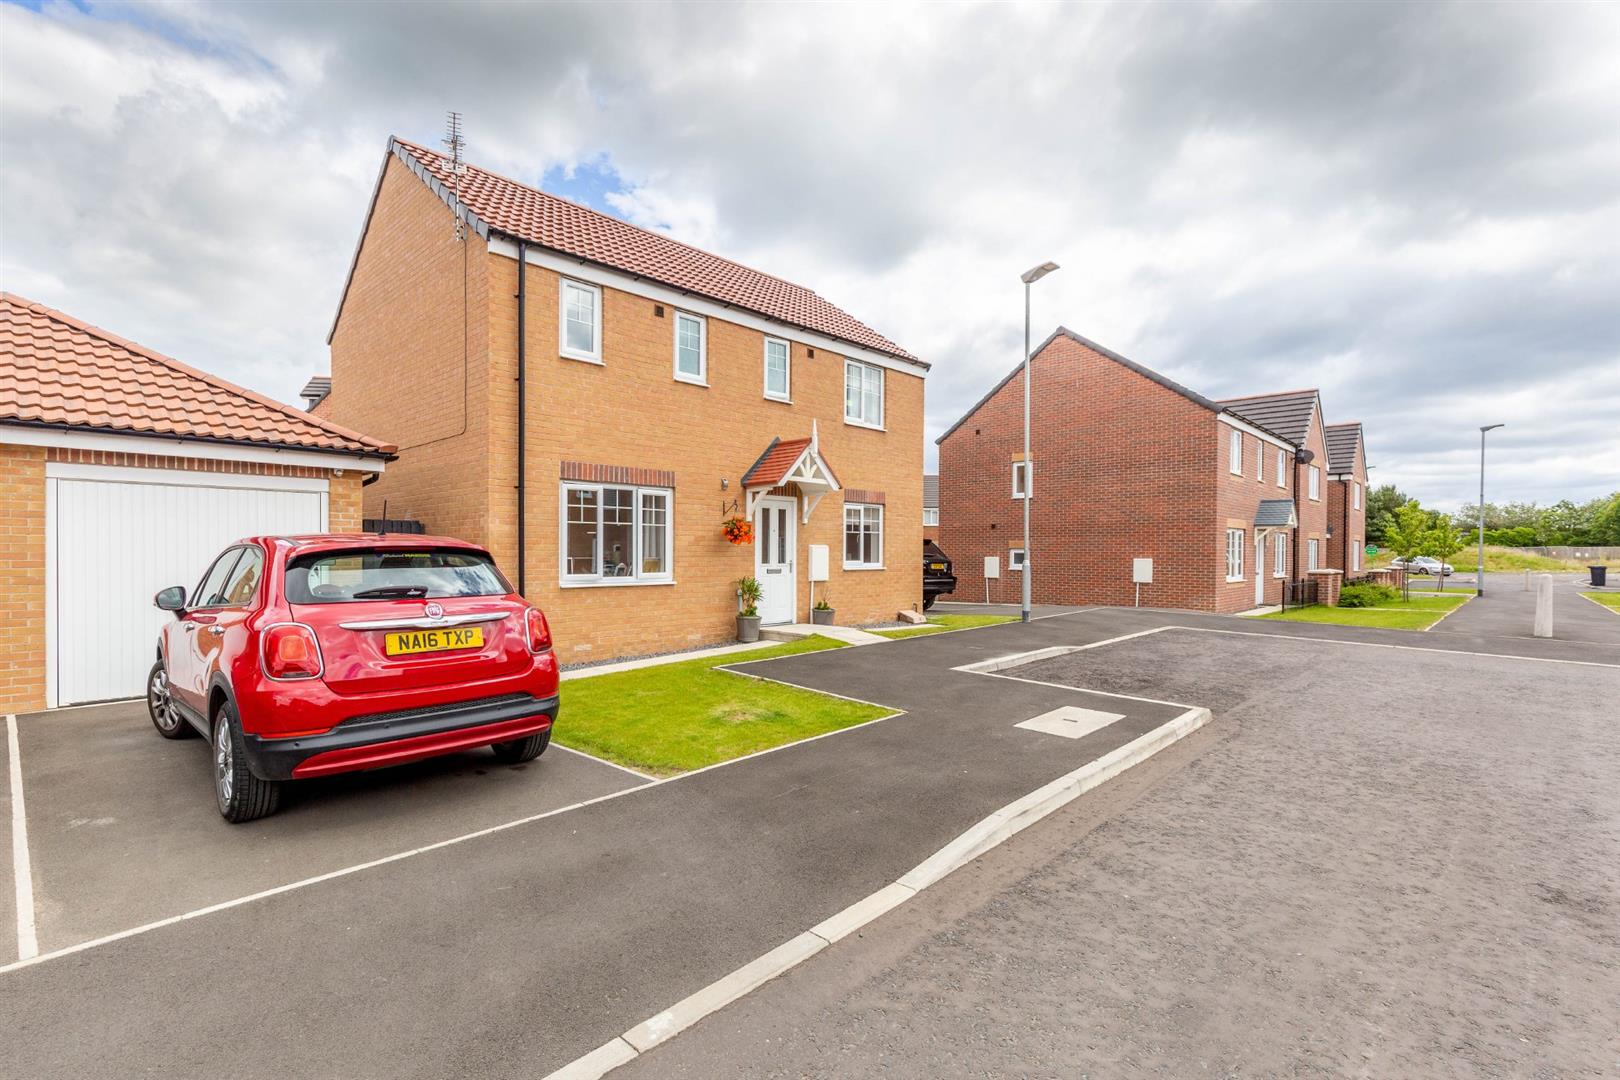 3 bed detached house for sale in Longhorsley Green, Ashington 0